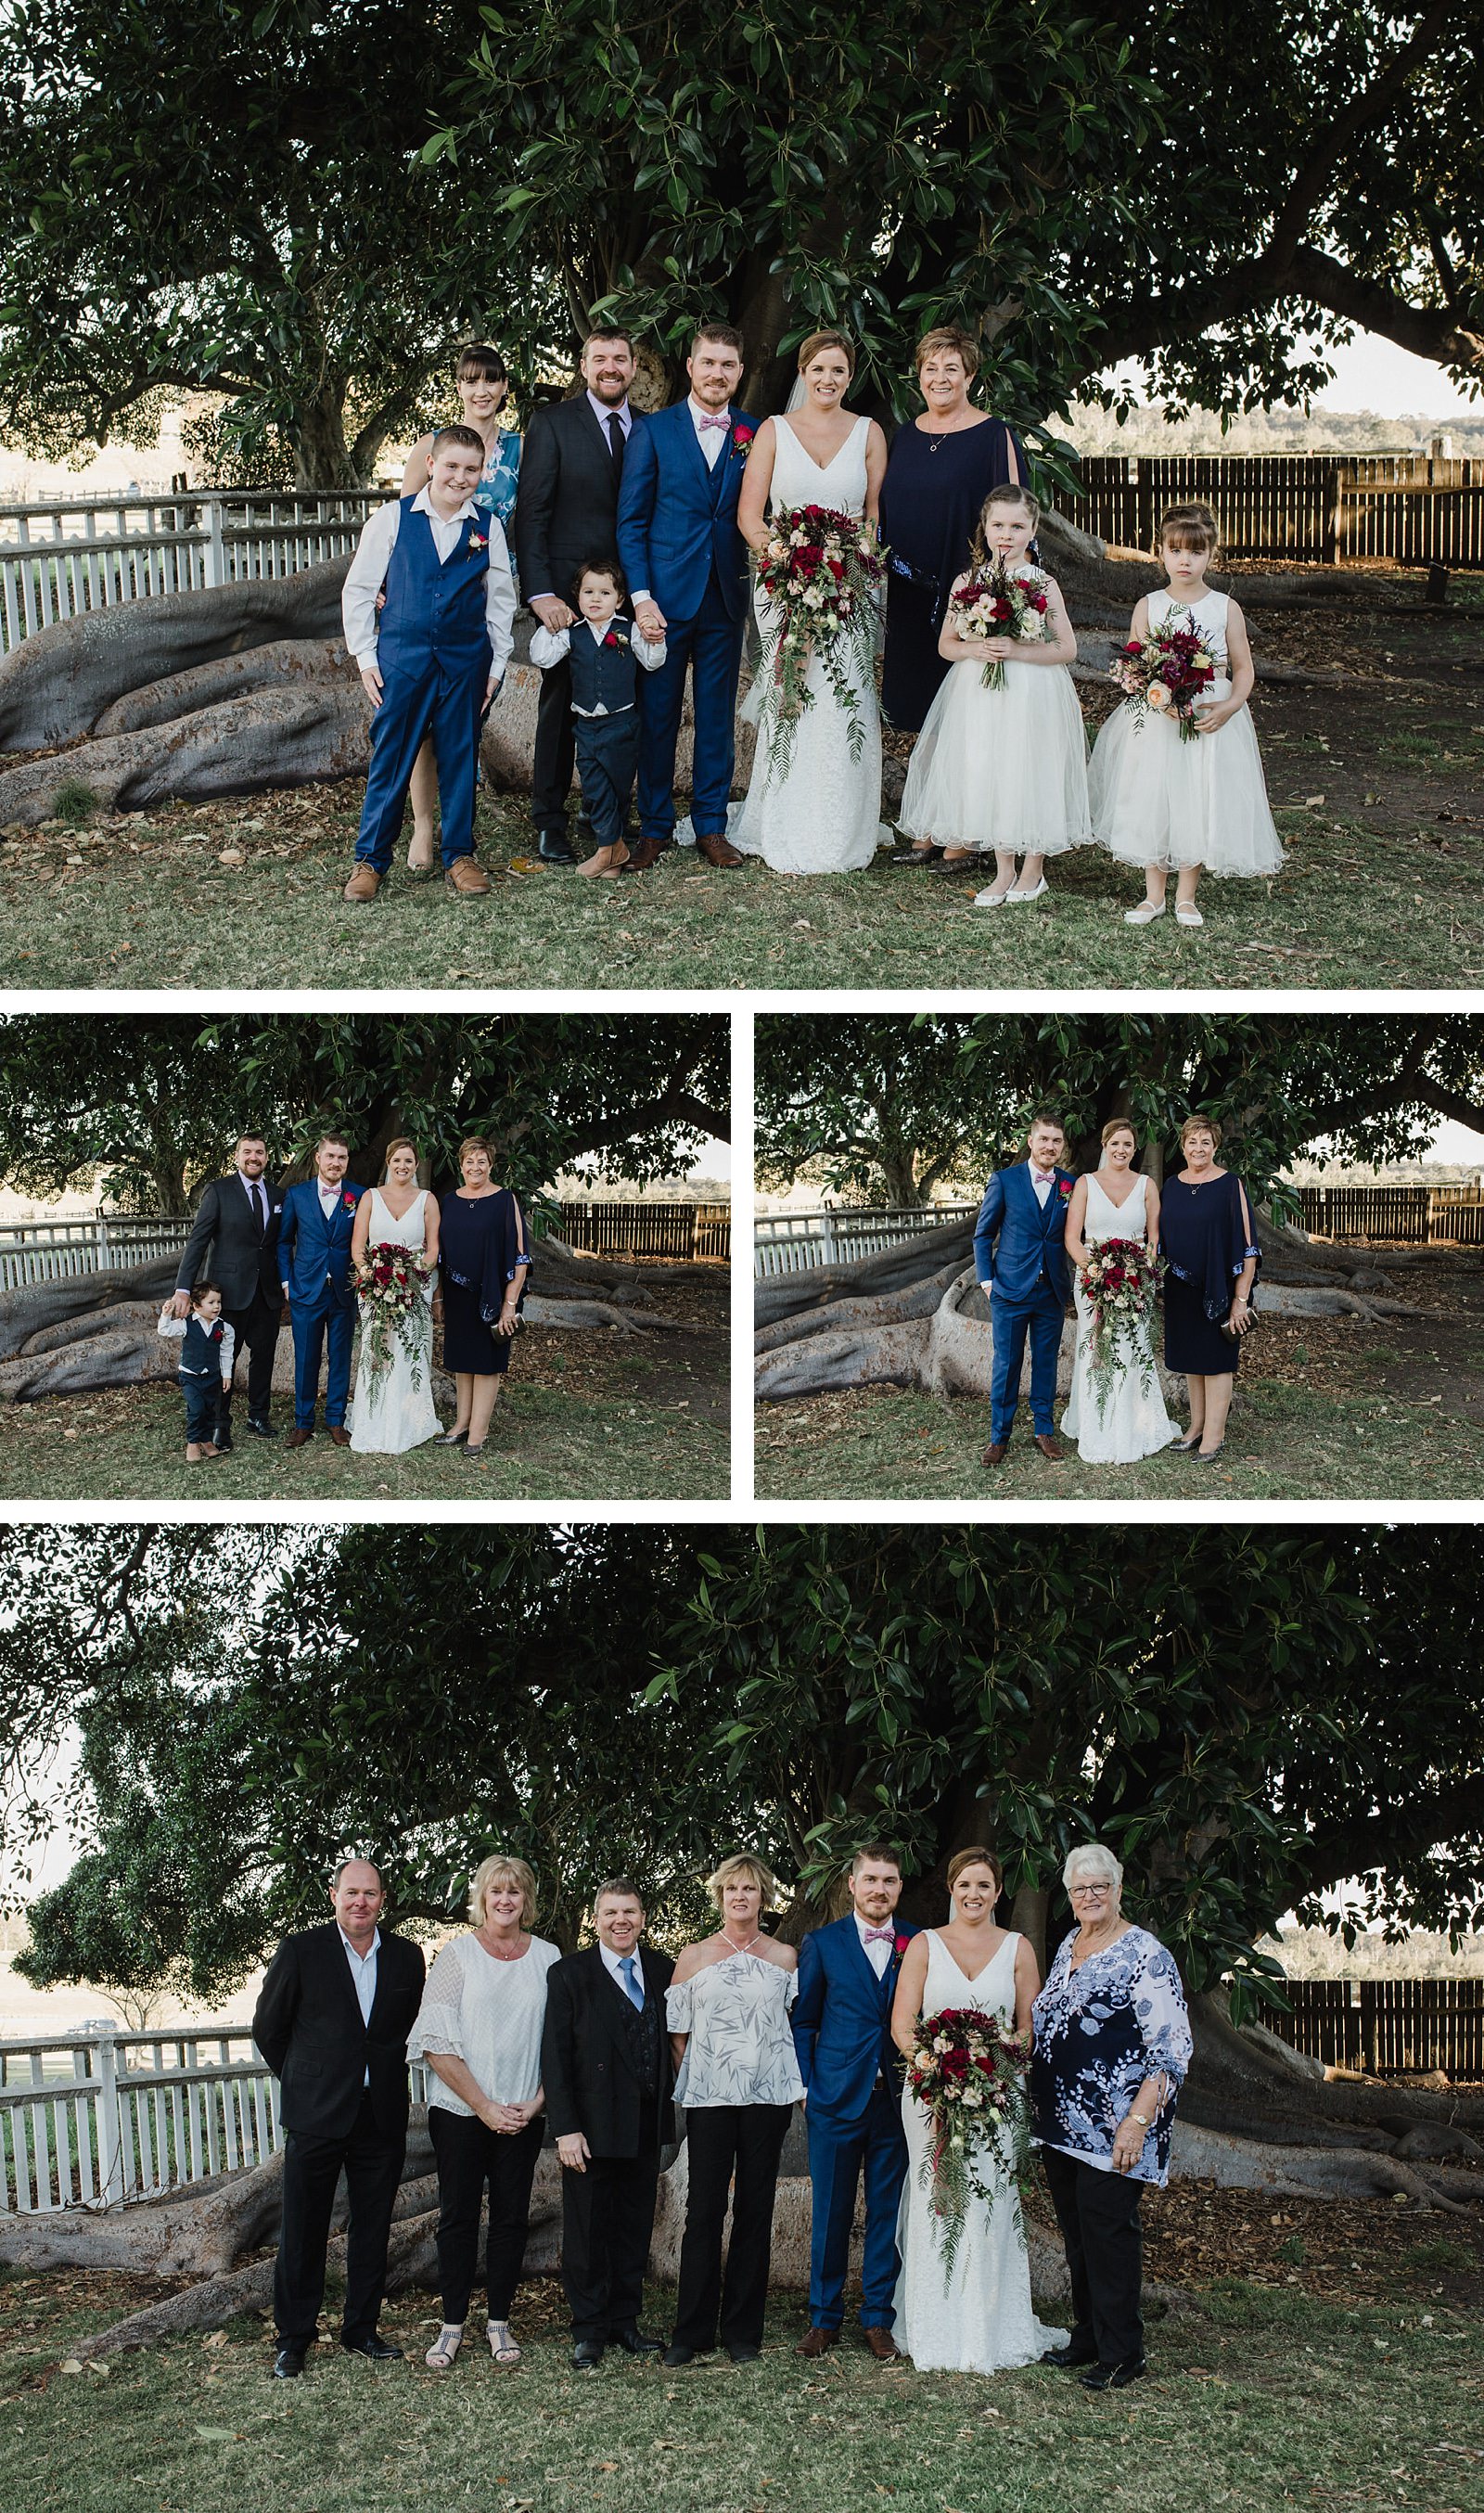 076Hunter Valley Wedding Photographers Bryce Noone Photography at Tocal Homestead Wedding Venue.jpg